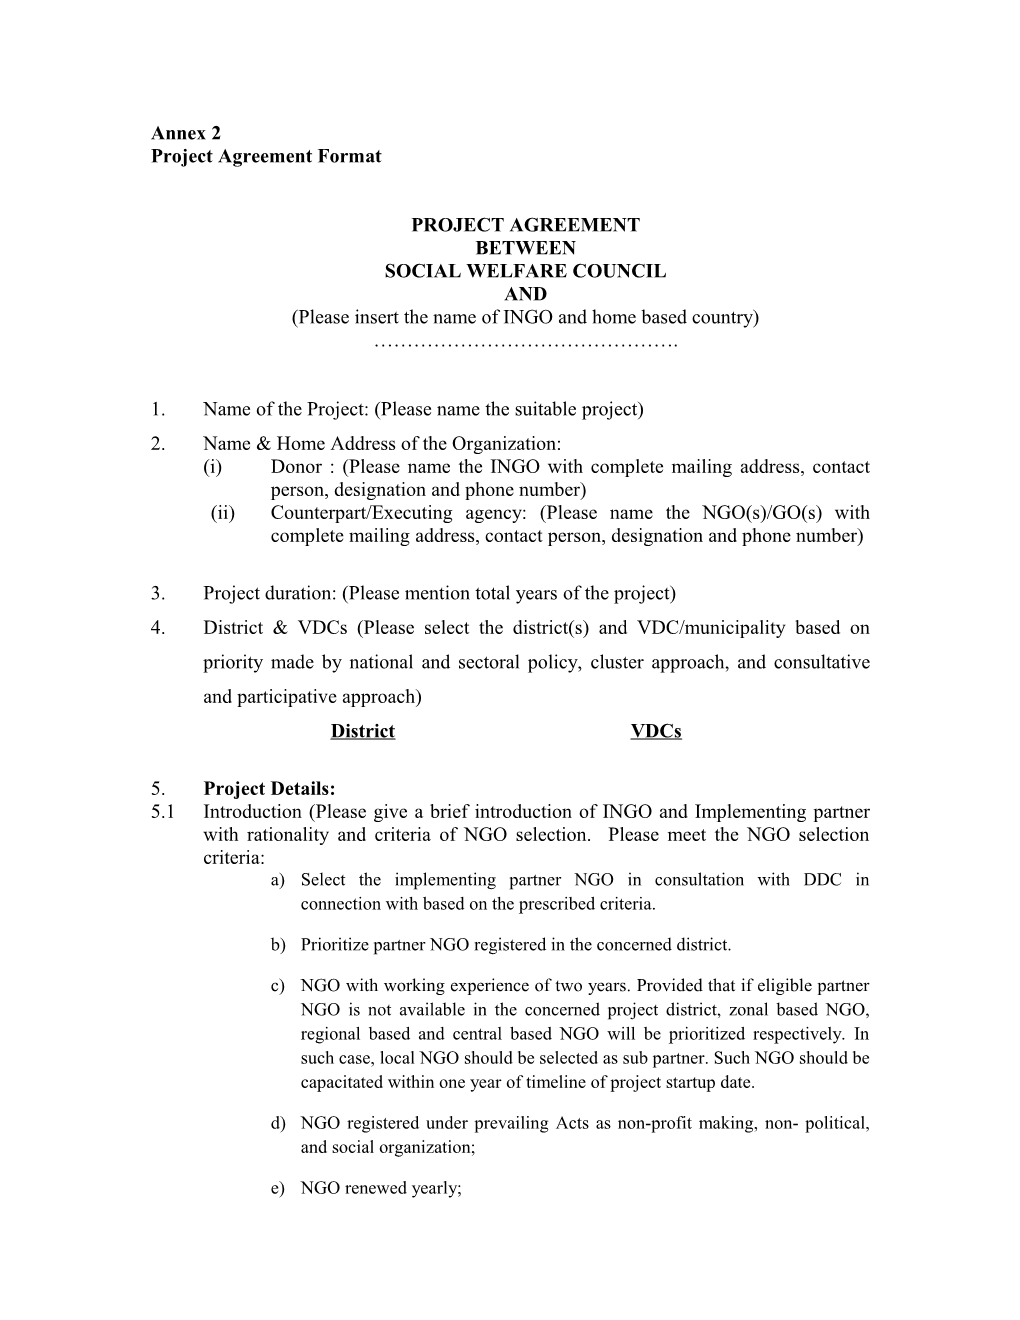 Project Agreement Format